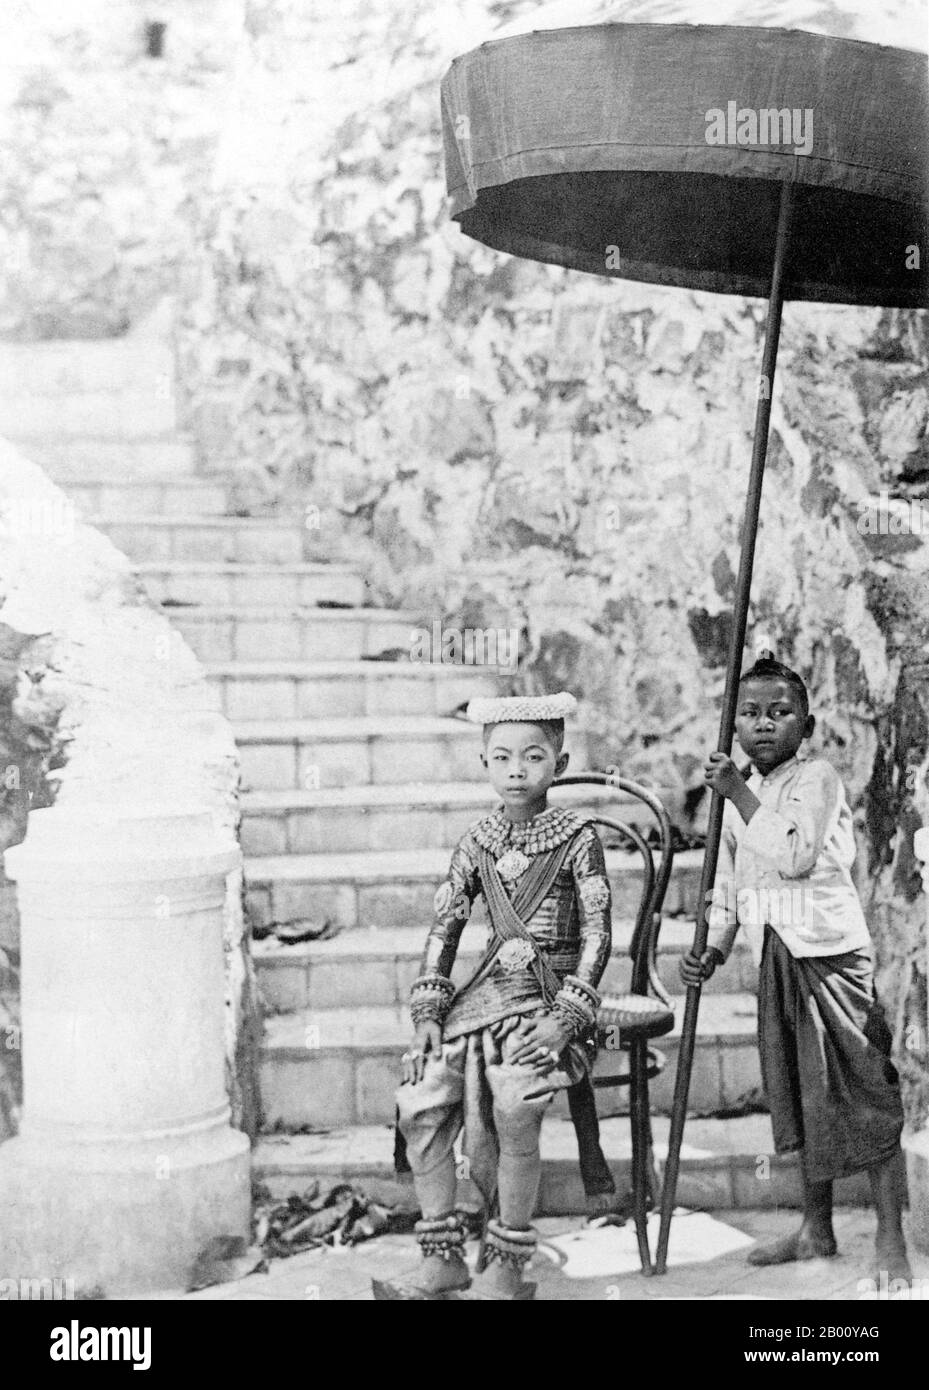 Cambodia: An unidentified young Khmer prince and attendant in Phnom Penh in 1921.  The little prince would most likely have been a relation of King Preah Bat Sisowath who ruled Cambodia from 1904, when King Norodom died, until his death in 1927 when he was succeeded by his son and crown prince, Prince Sisowath Monivong. Stock Photo